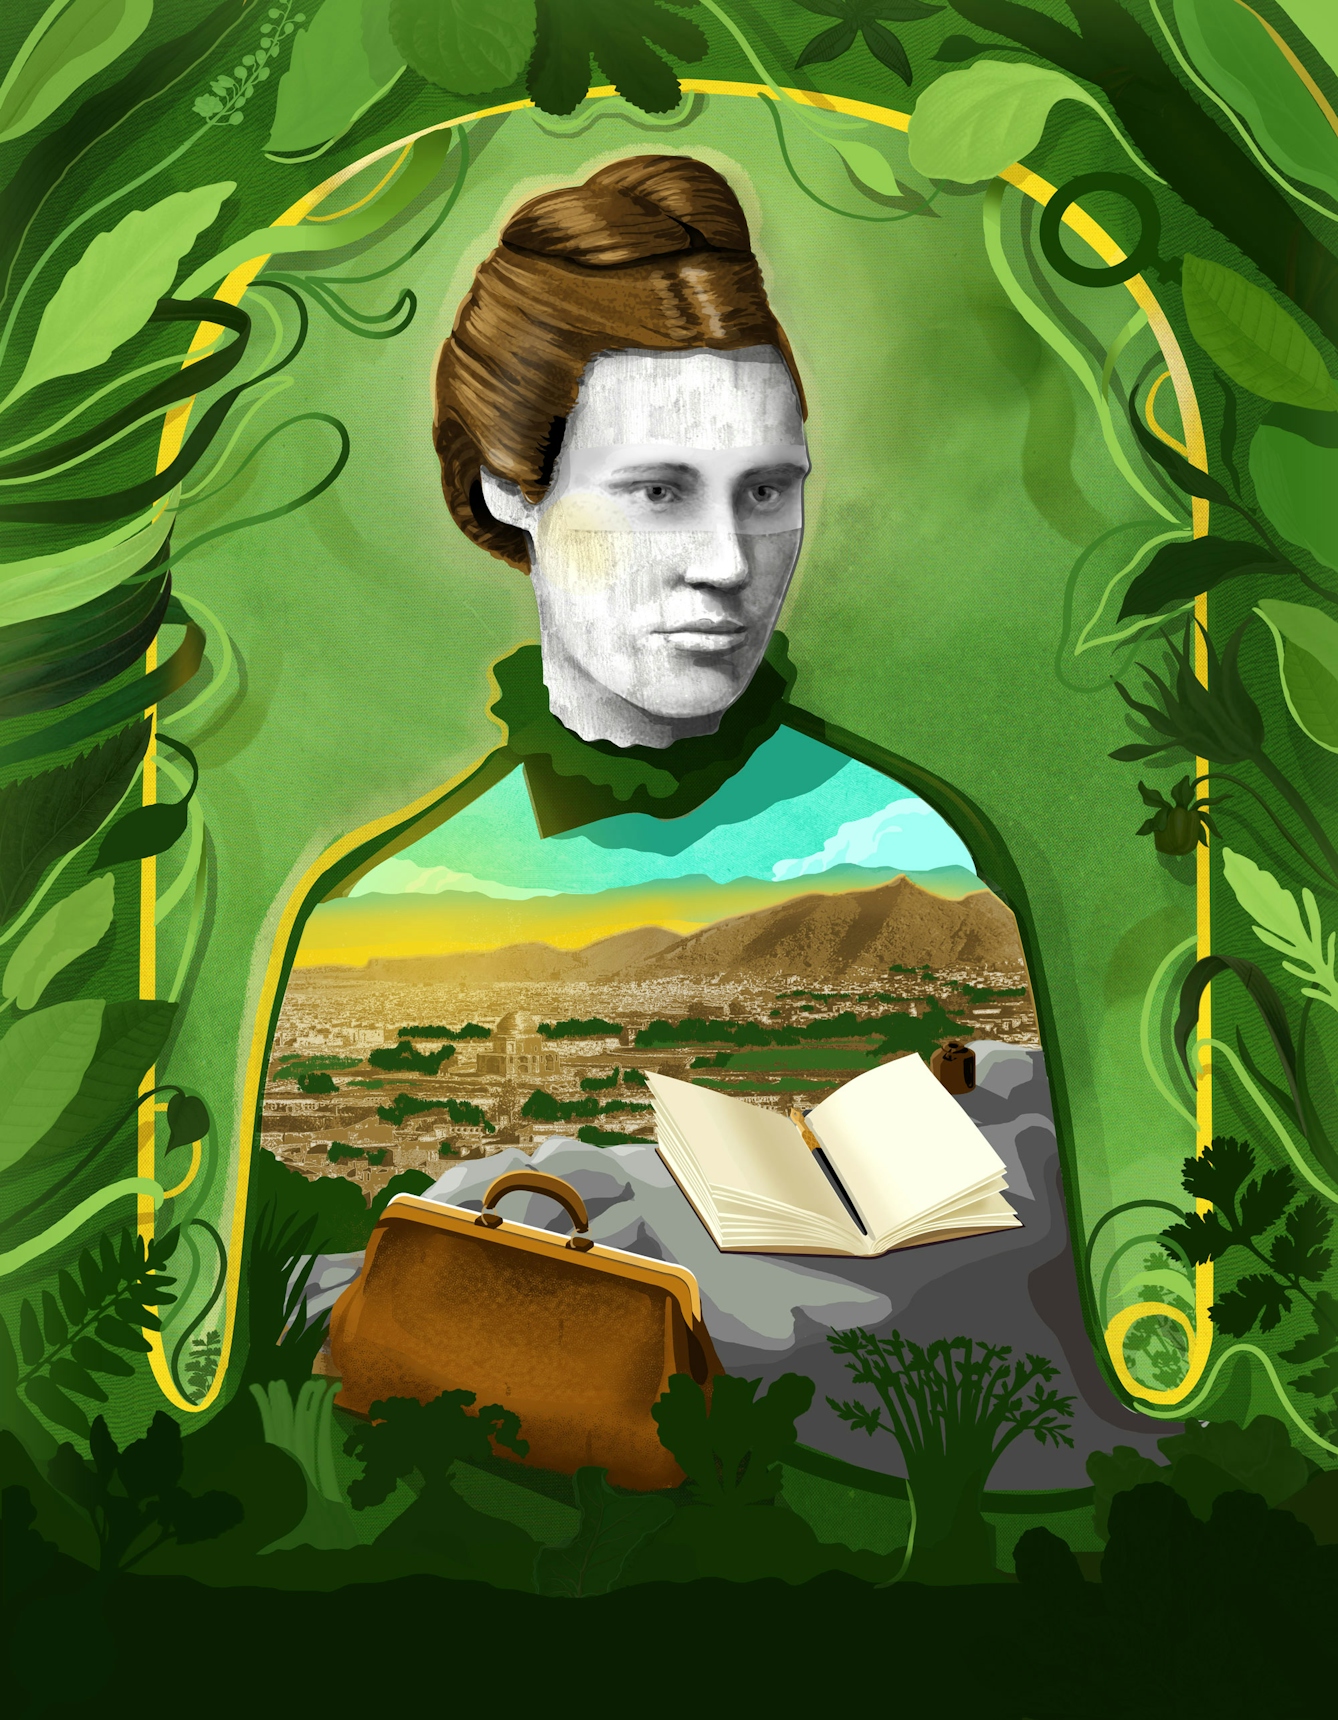 Illustration of Lillias Hamilton surrounded by greenery. In the space of her torso is one of her photographs taken in Afghanistan, and in front of her is a doctors bag and notebook.